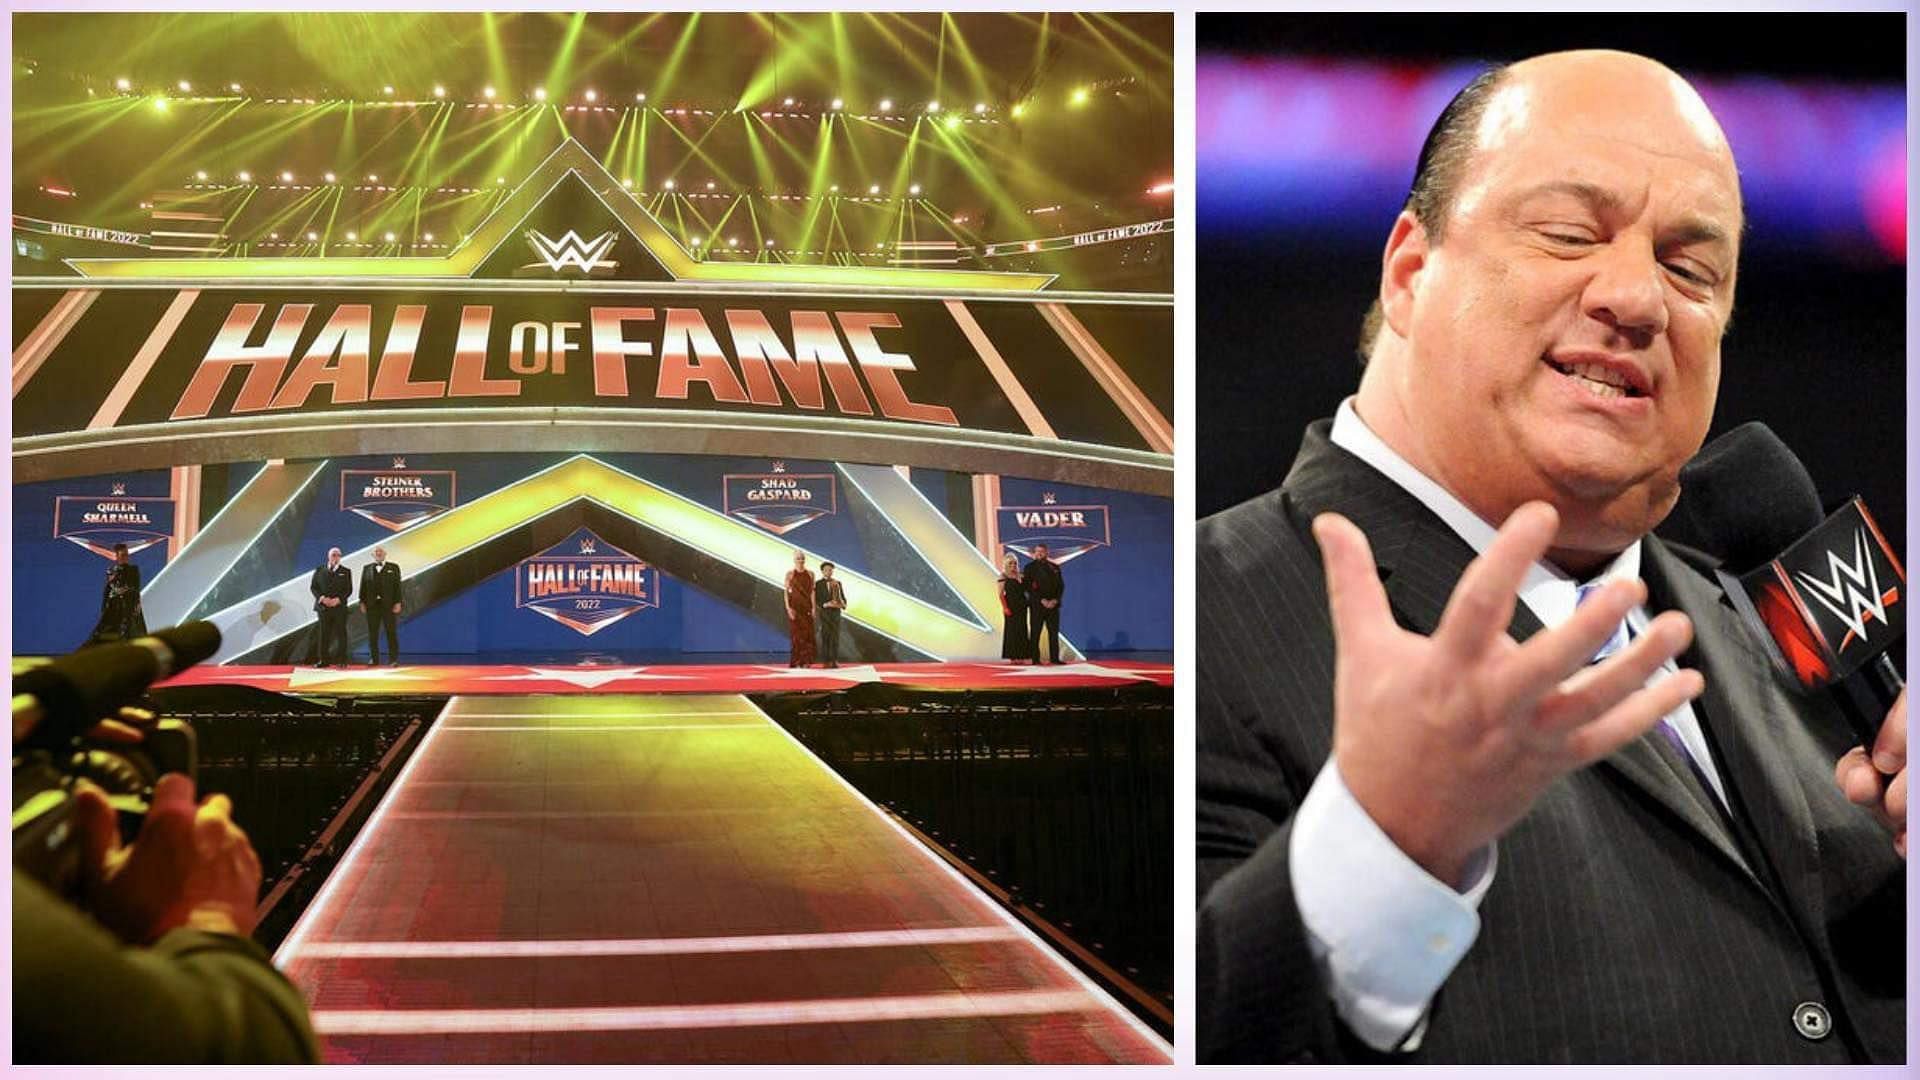 WWE Hall of Fame inductees Full confirmed list so far & rumored names